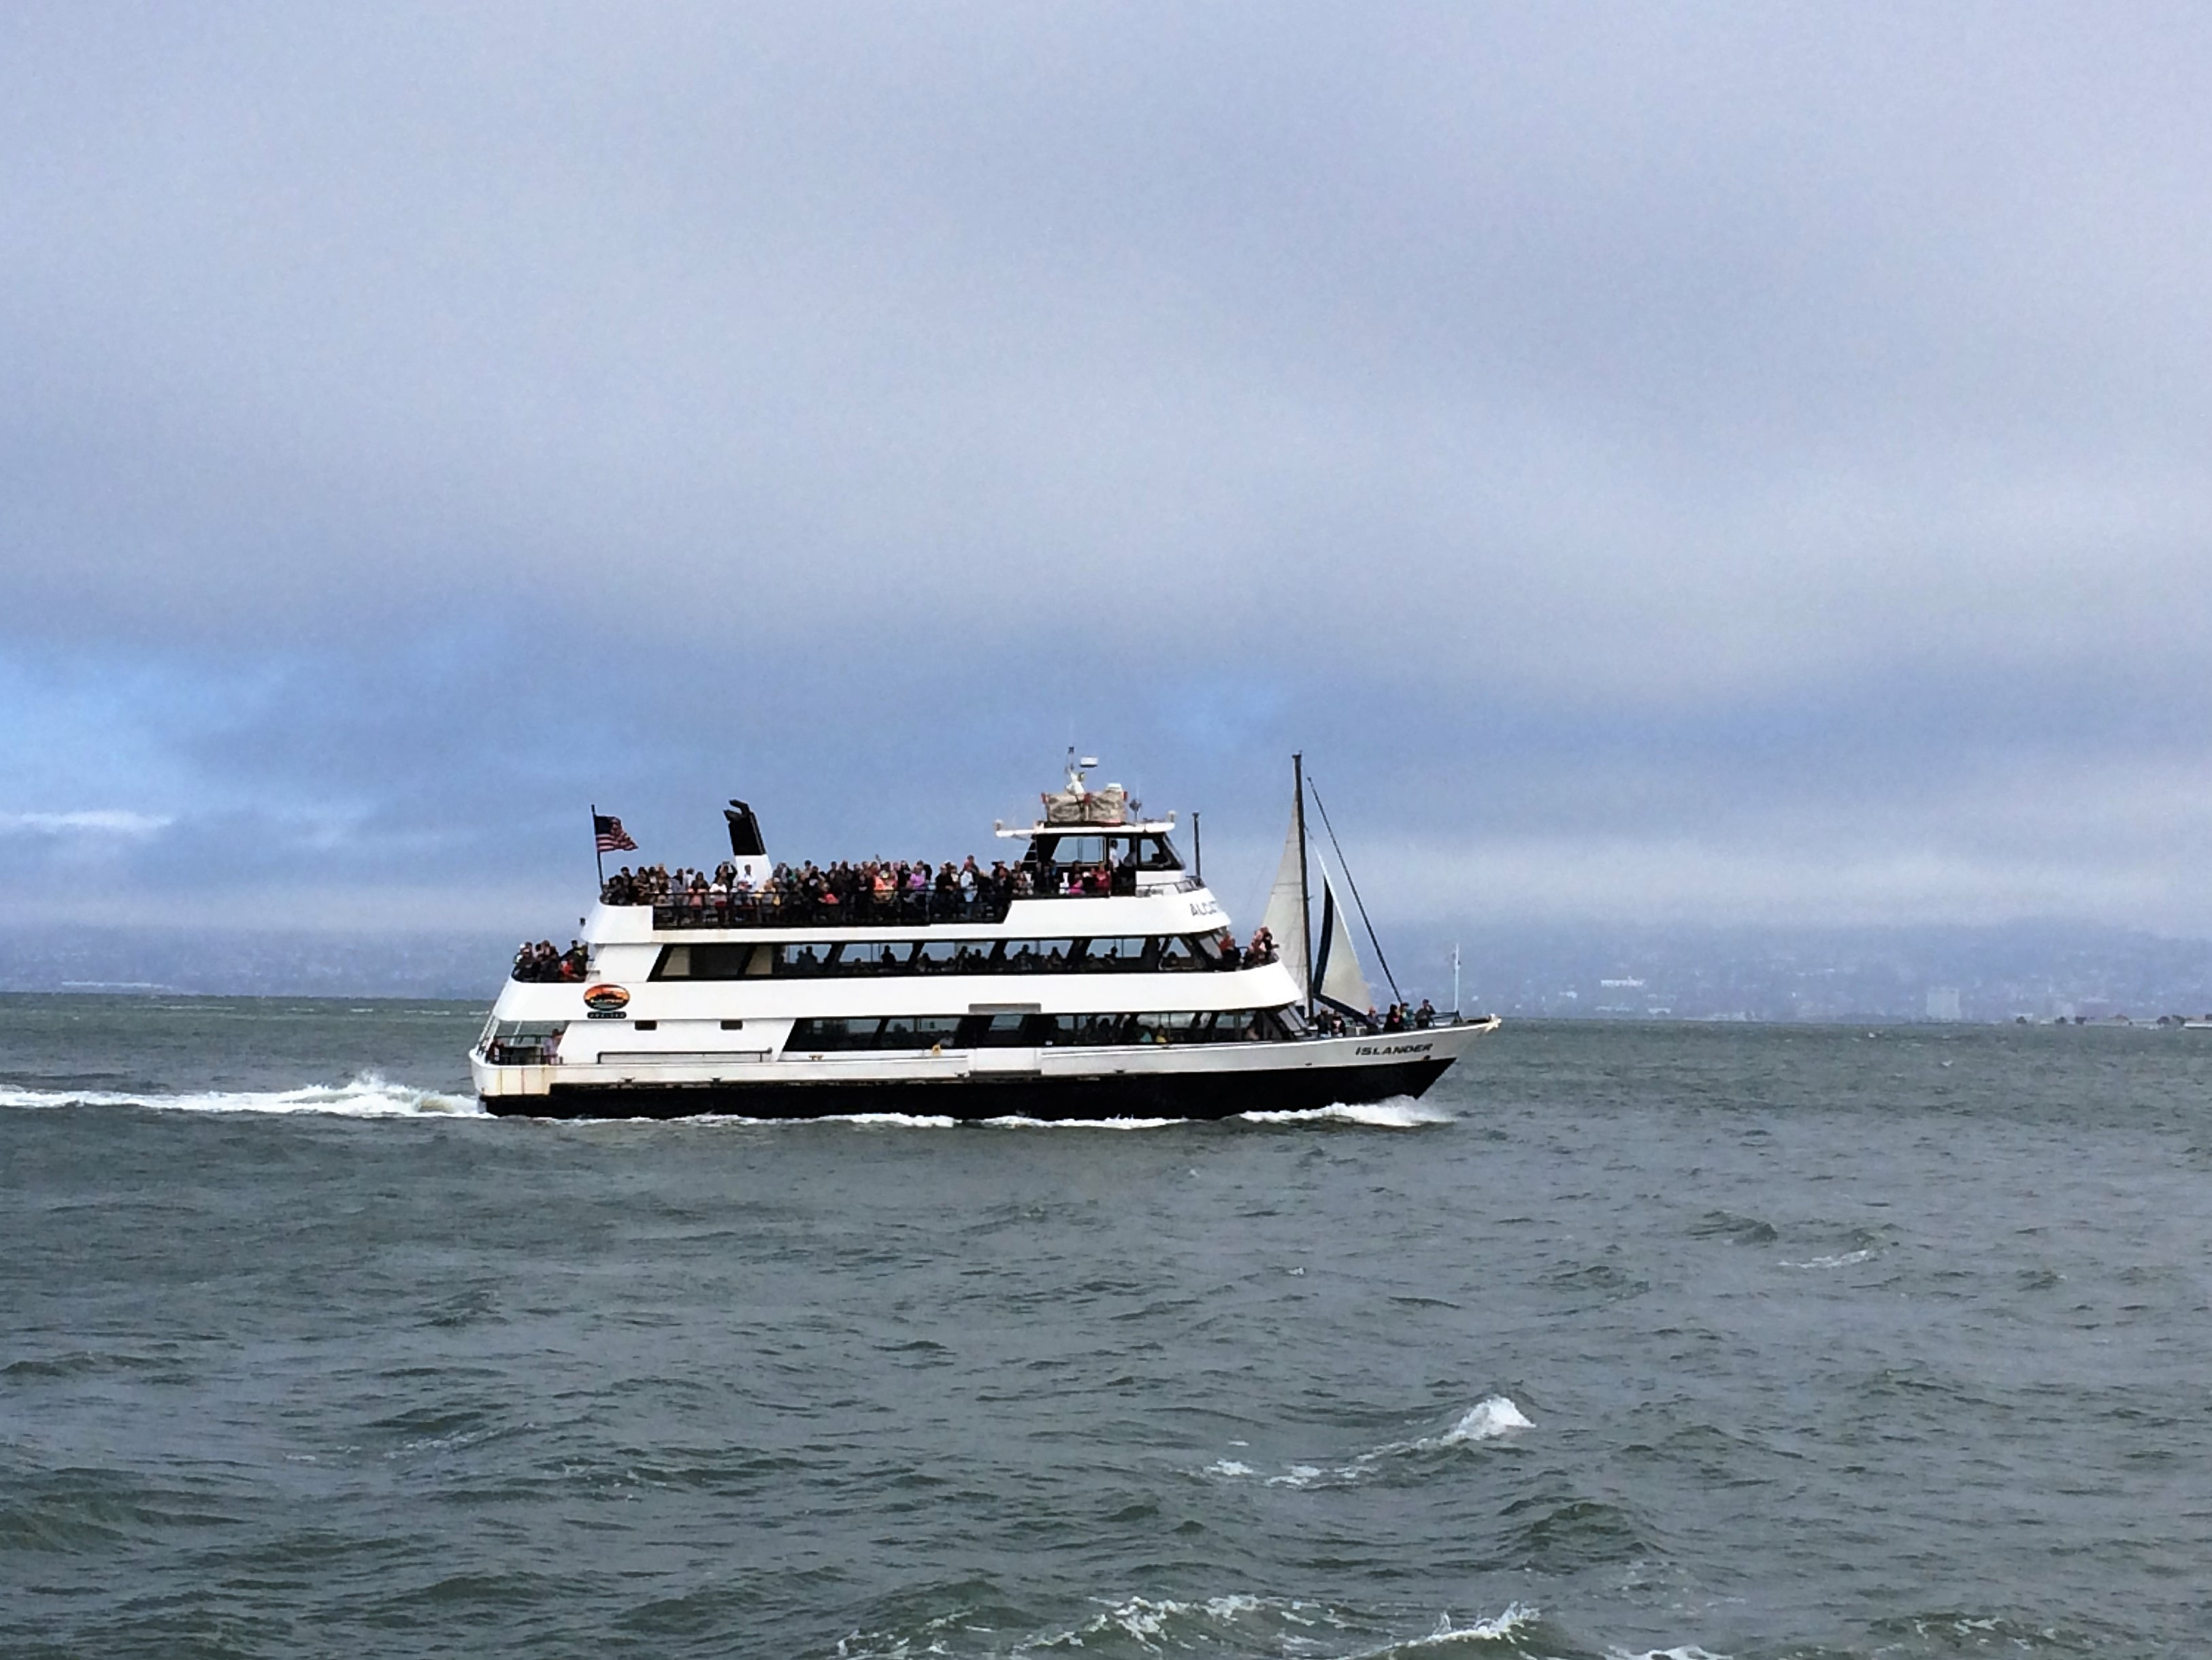 Passenger ferry moving in water with a grey sky in the background.